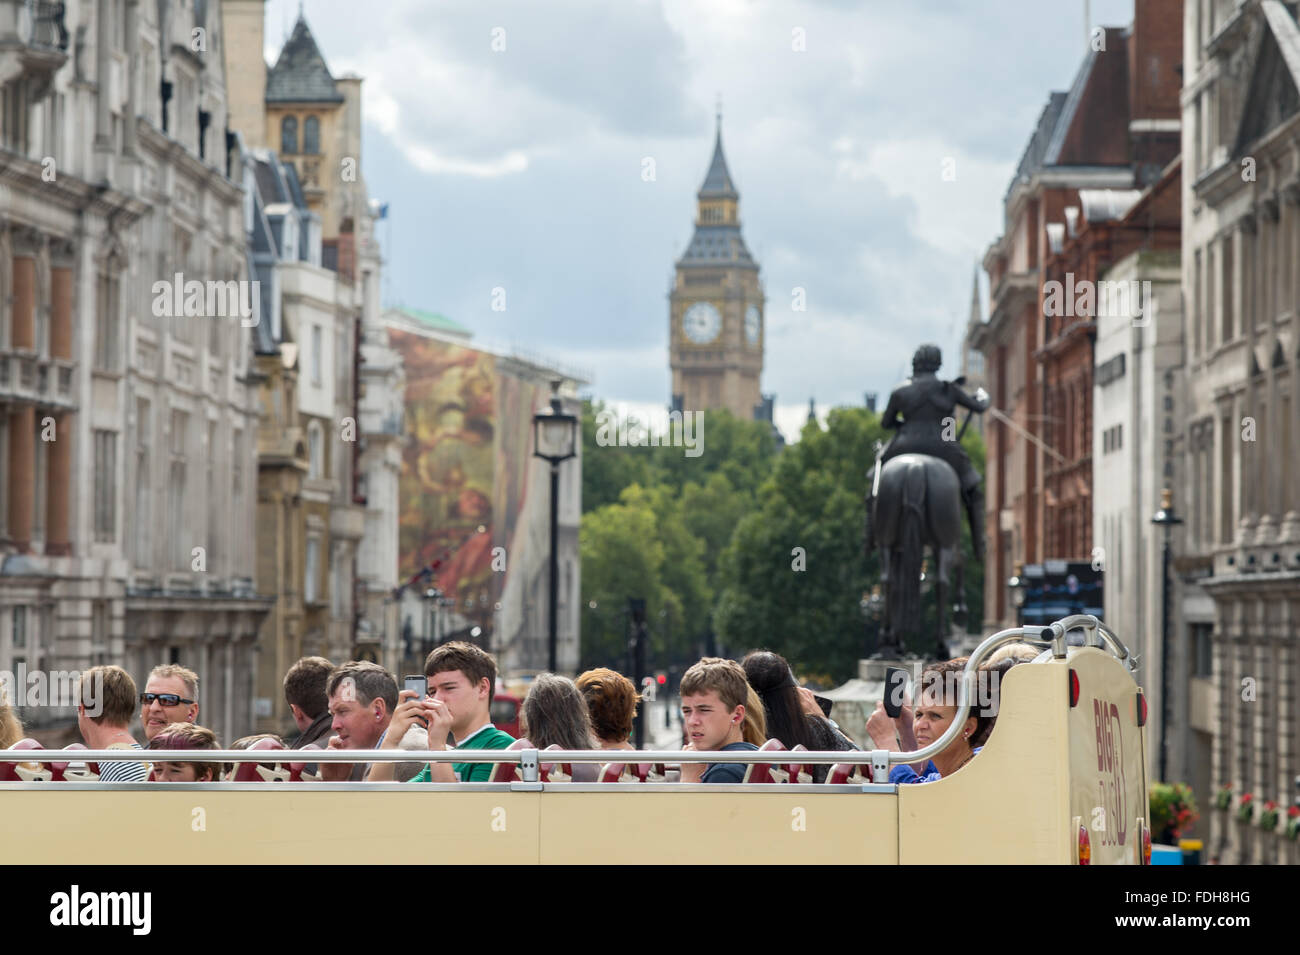 Tourists on a double decker bus in front of Big Ben in London, England. Stock Photo